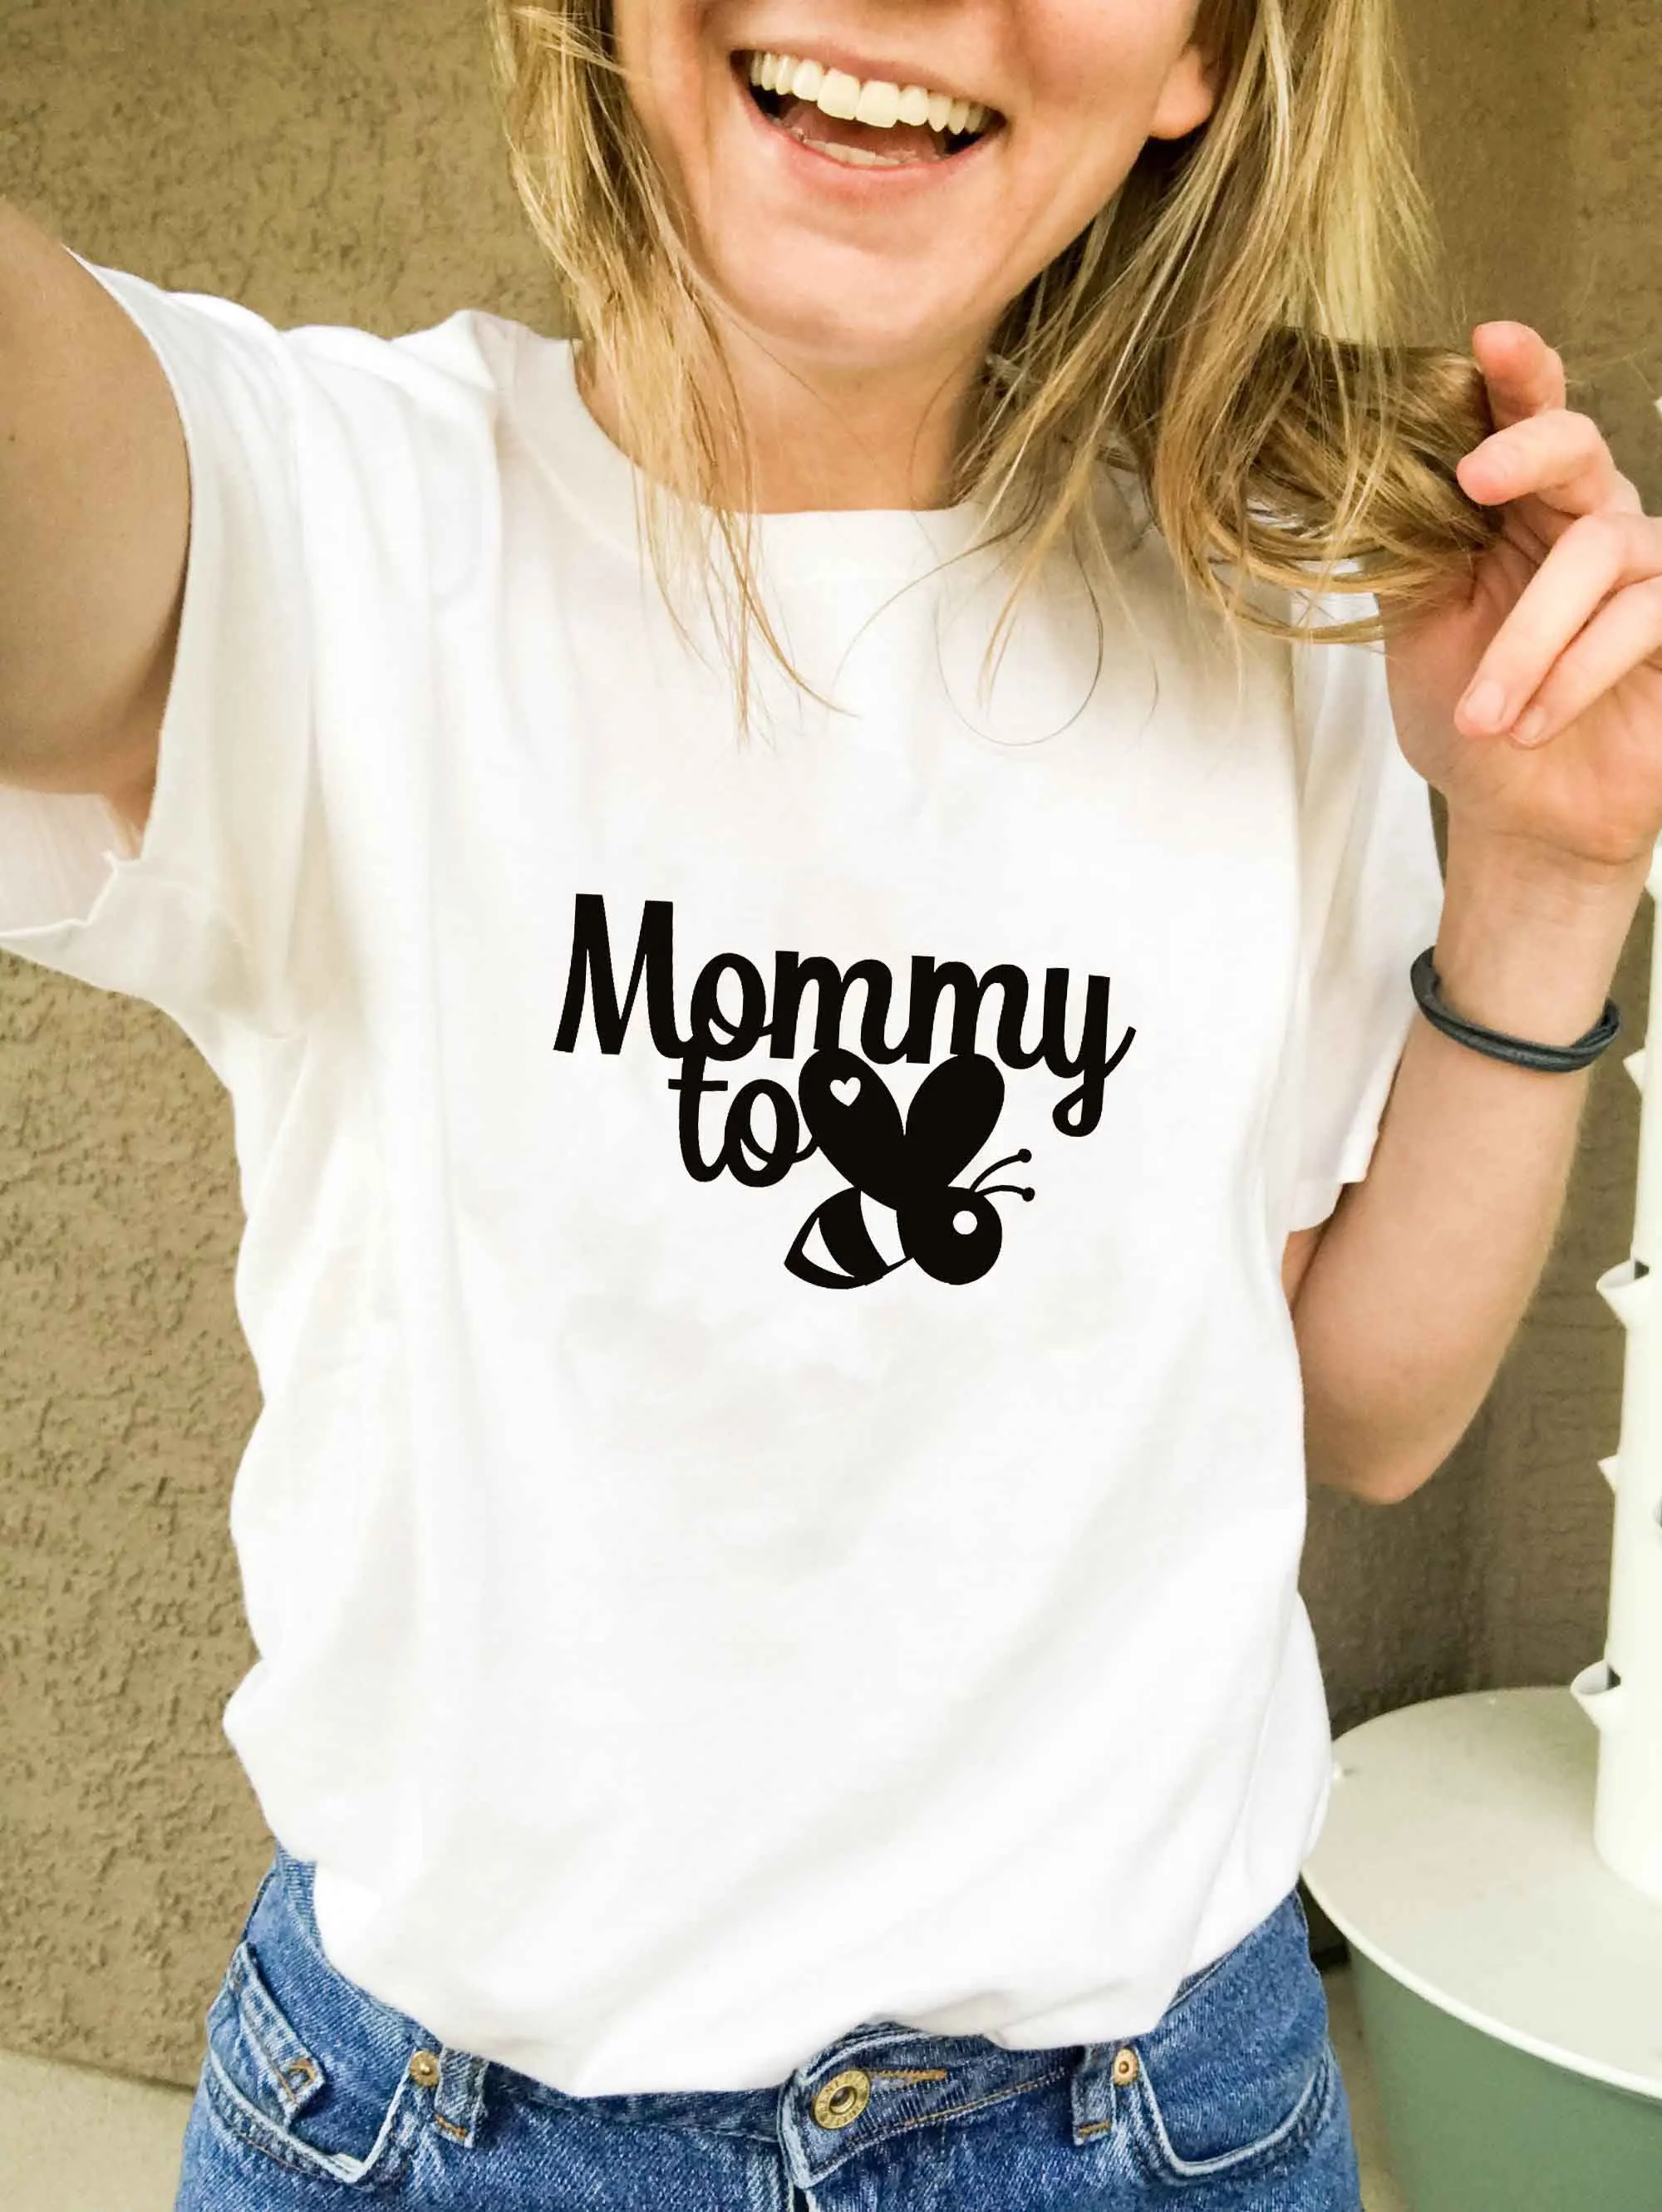 

Mommy To Bee New Arrival Graphic Women's Summer Funny Casual Cotton T-Shirt Mom To Be Shirt Baby Shower Gift